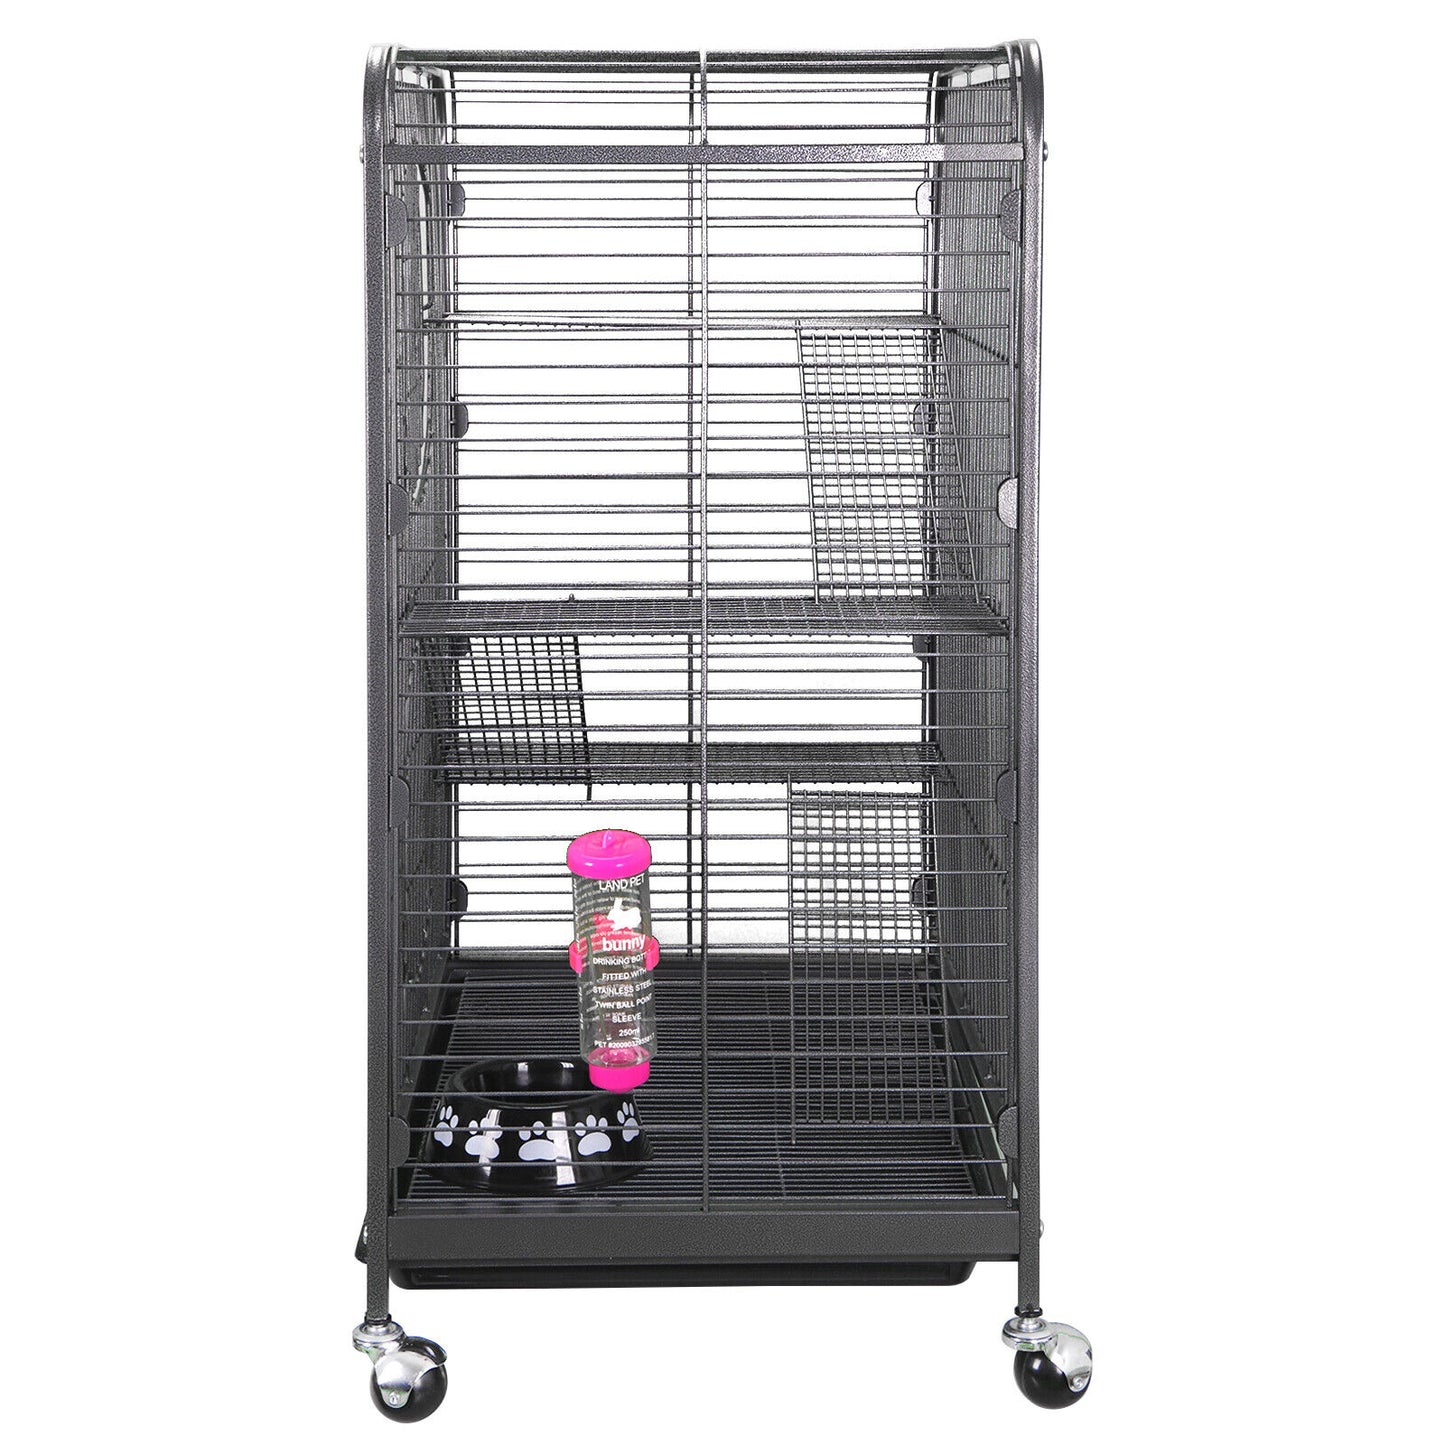 4-Tier Ferret Cat Cage Powder Coated House for Hamster Guinea Pig Chinchilla 37"